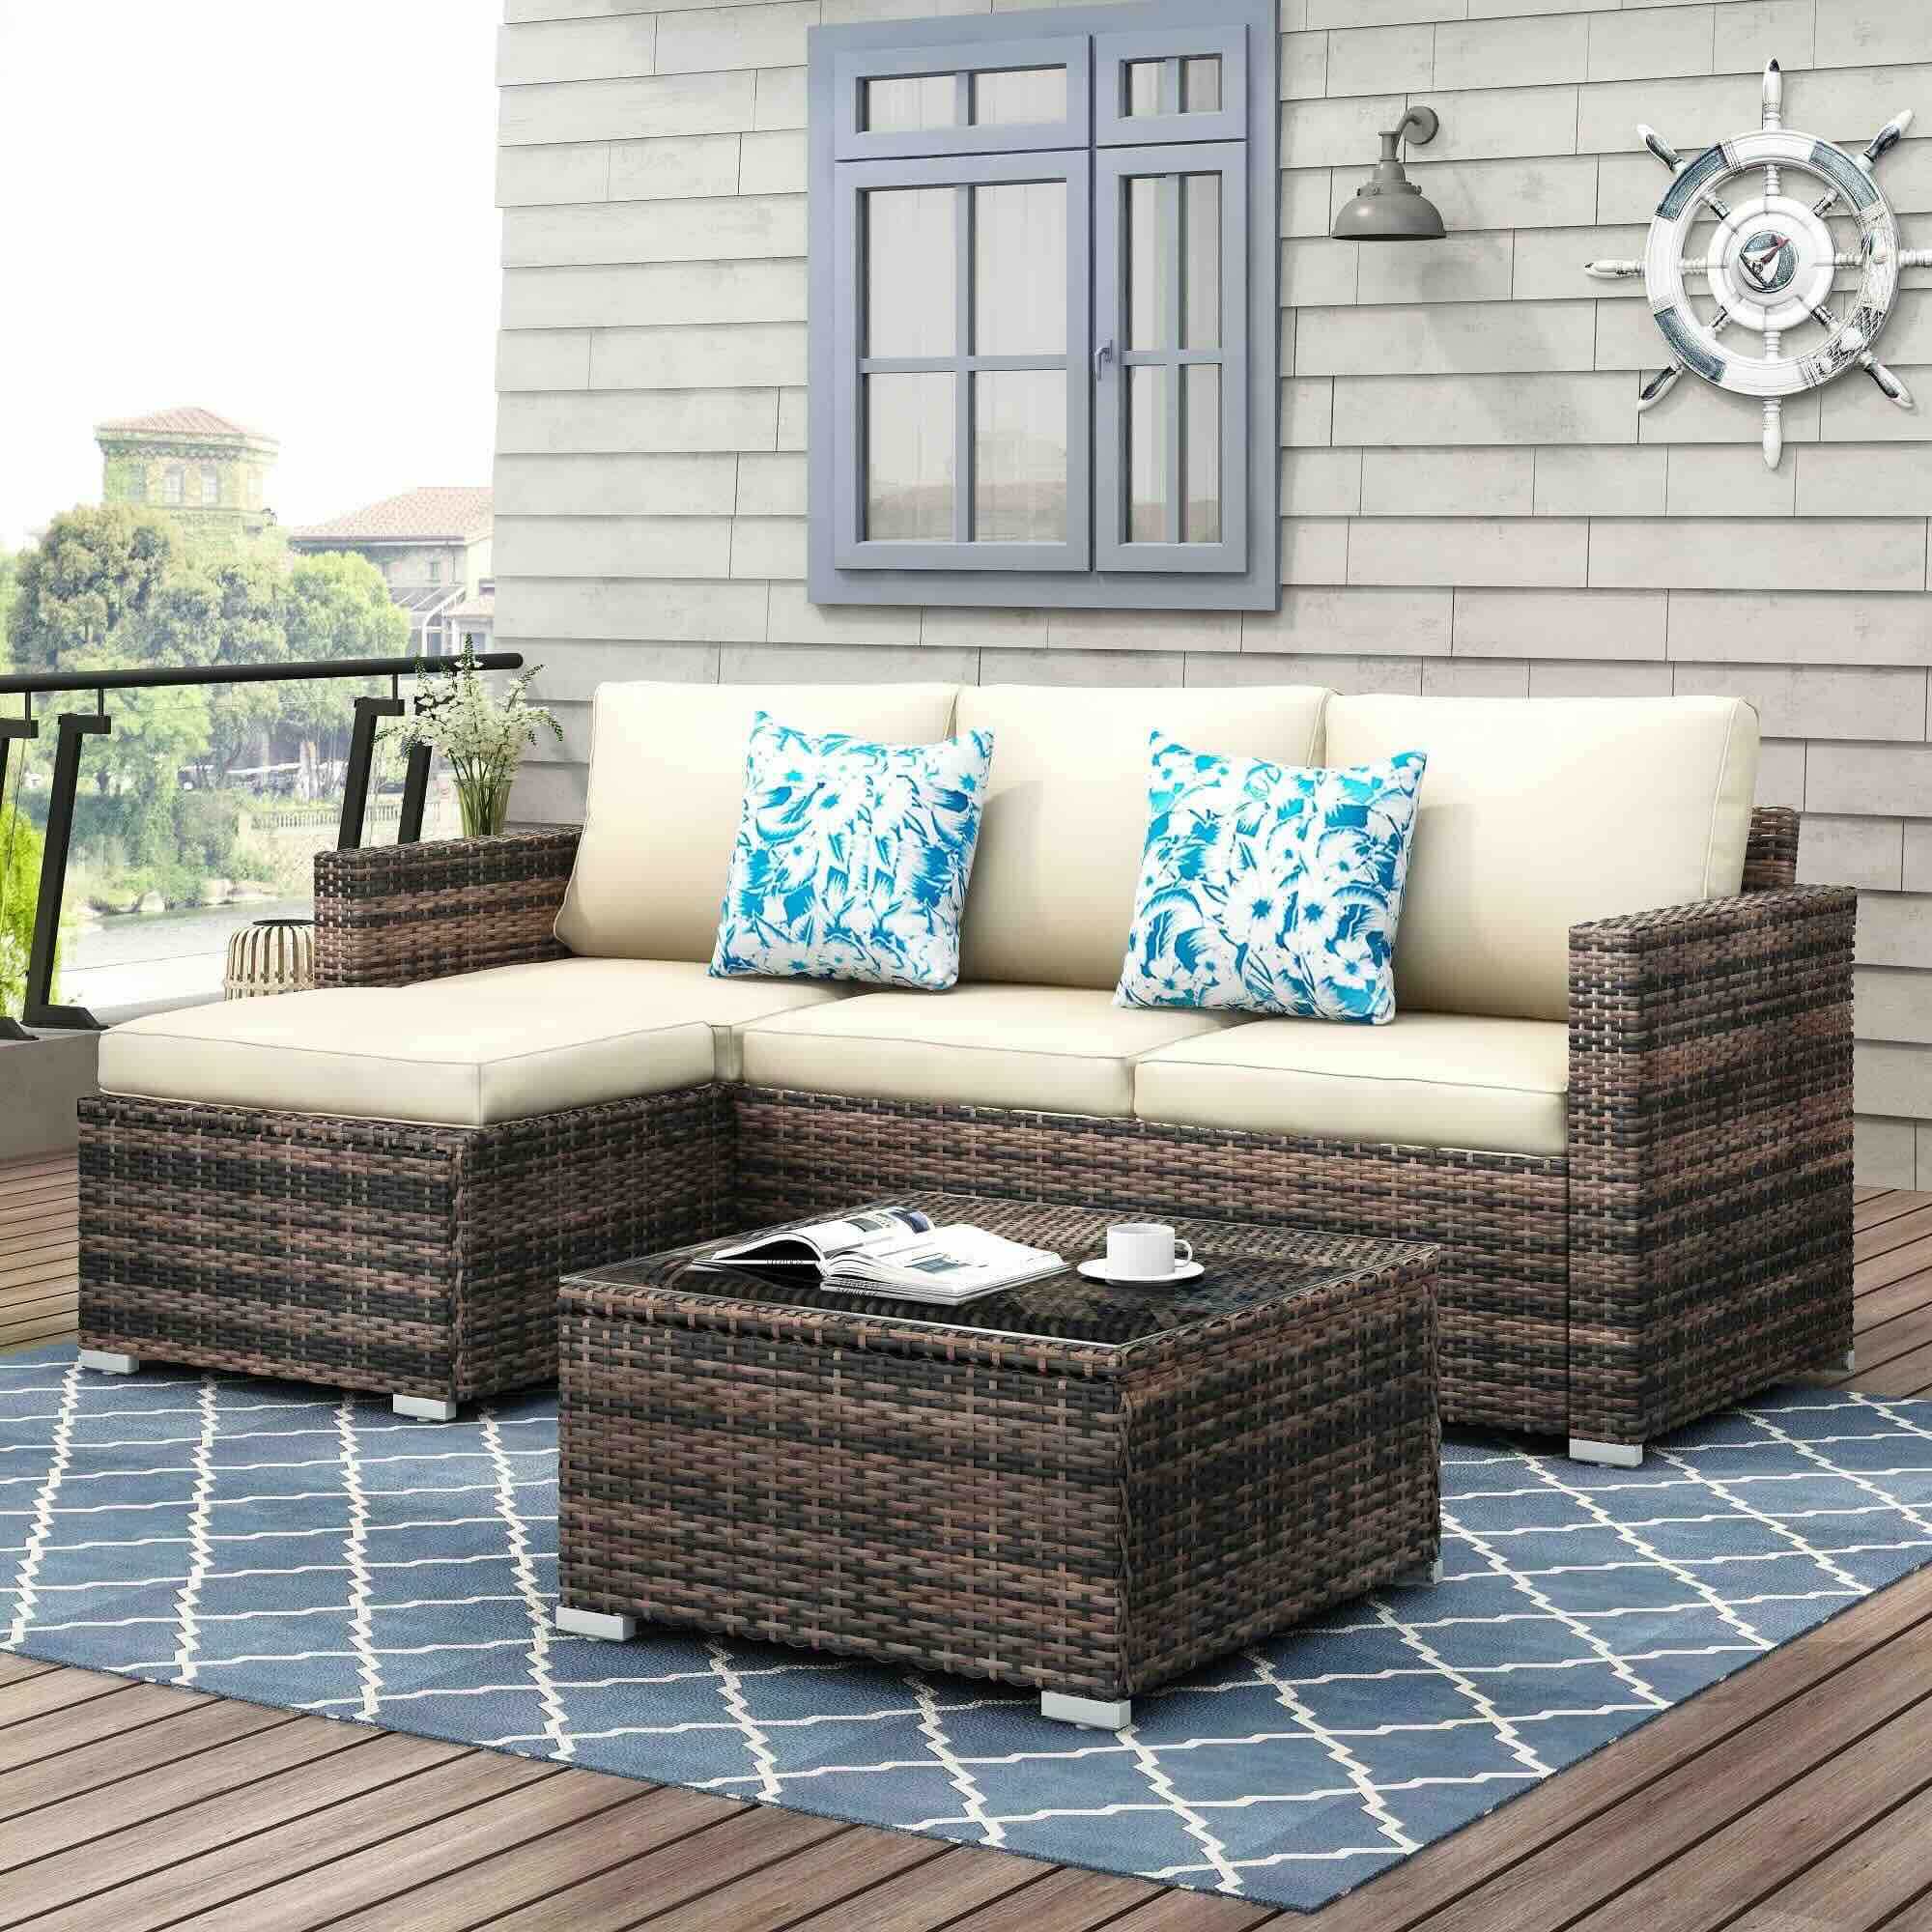 How To Make Patio Cushions More Comfortable